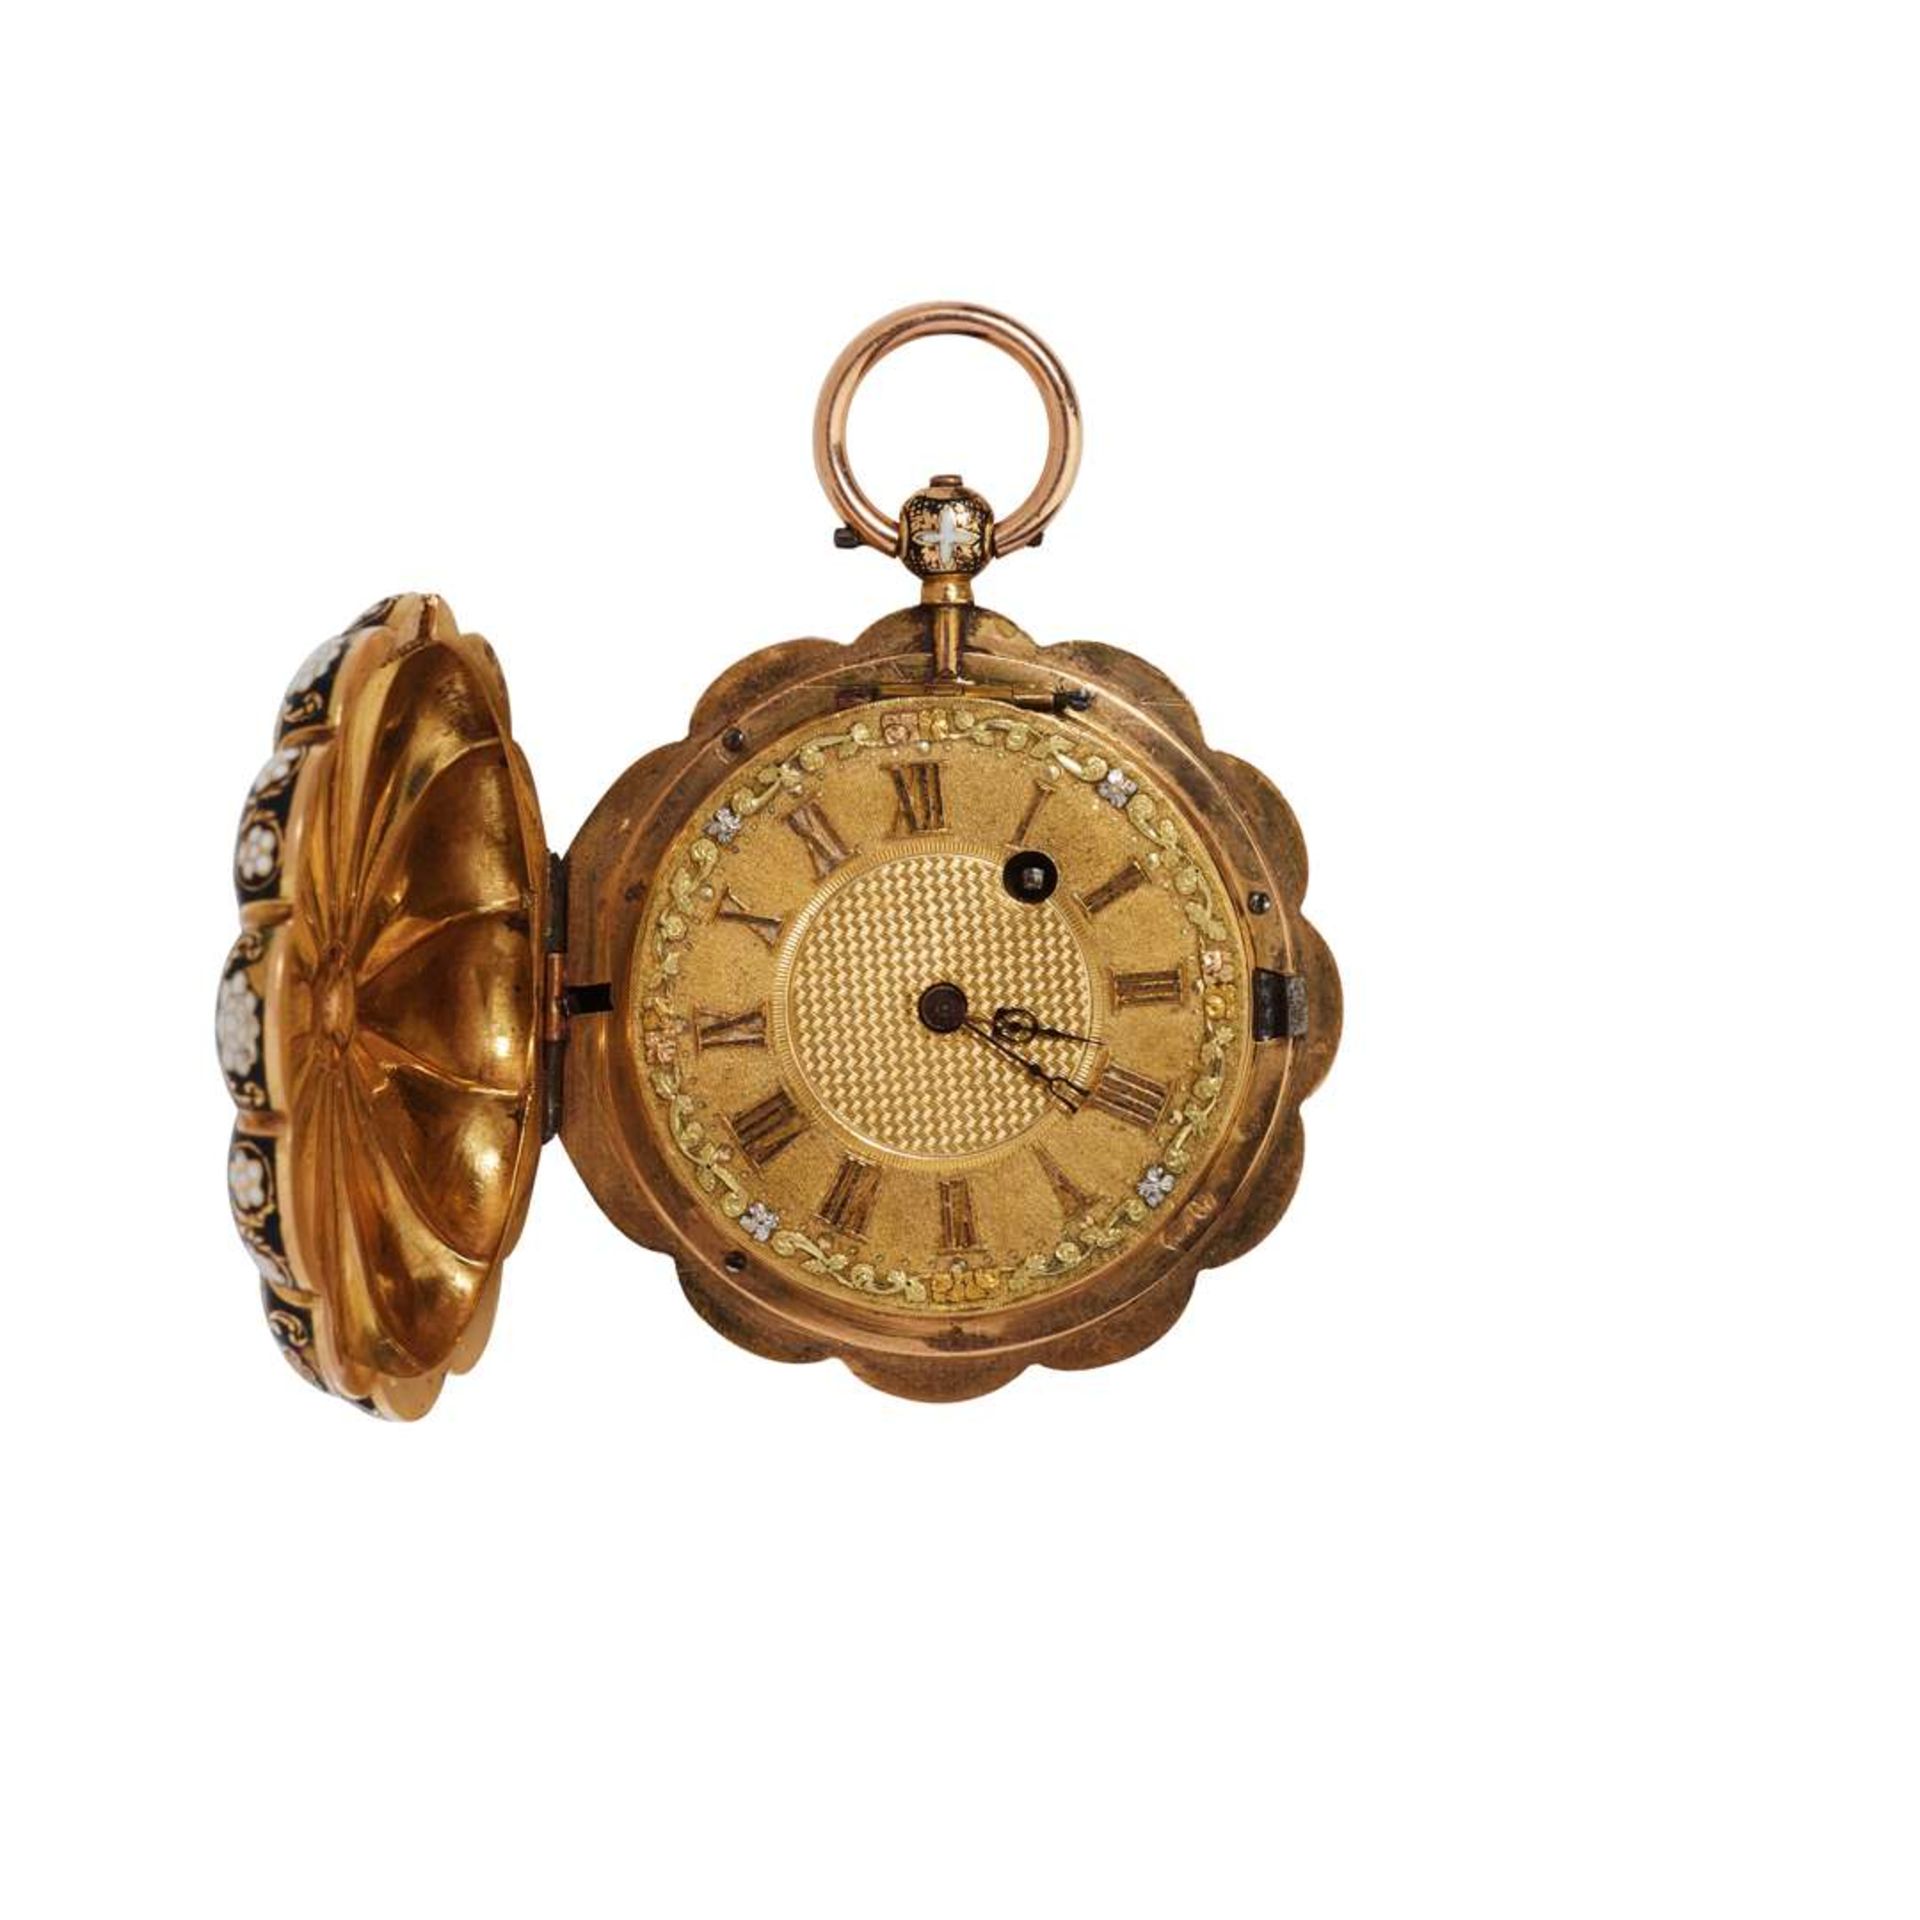 A fine, rare and unusual gold and enamel hunting cased scallop watch